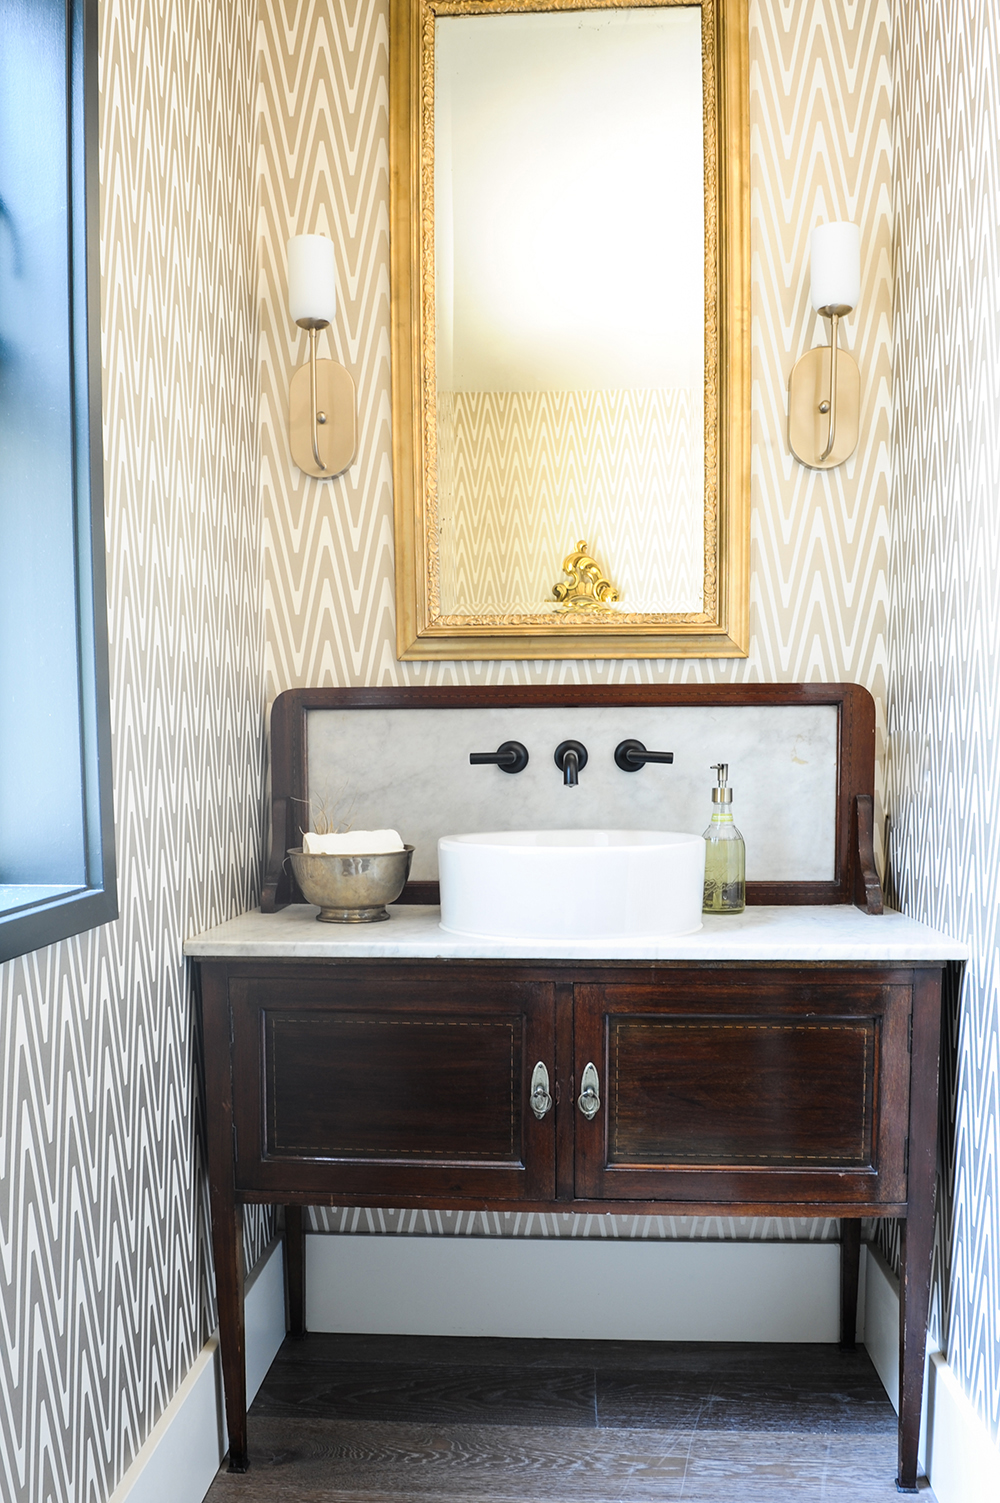 Powder room with wood vanity and gold striped wallpaper.